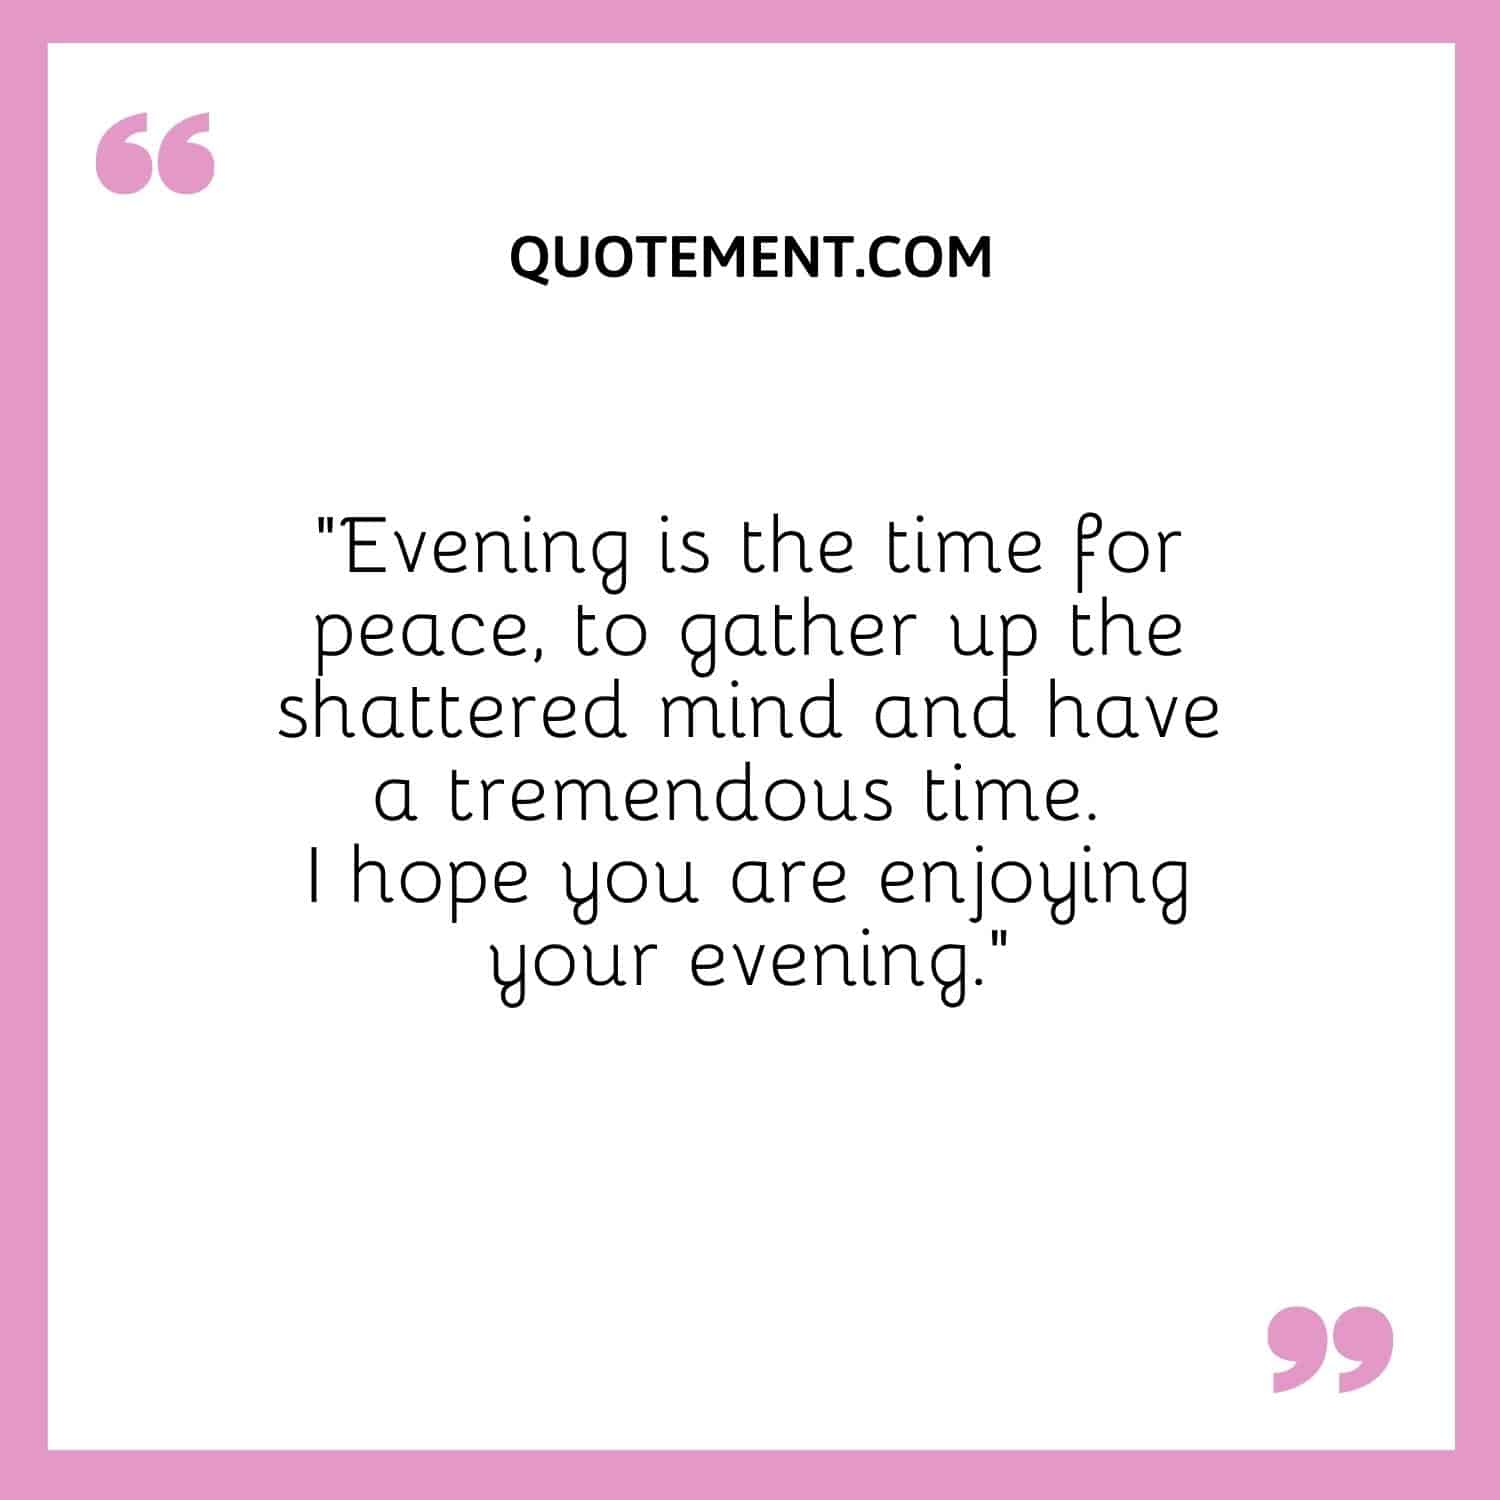 Evening is the time for peace, to gather up the shattered mind and have a tremendous time